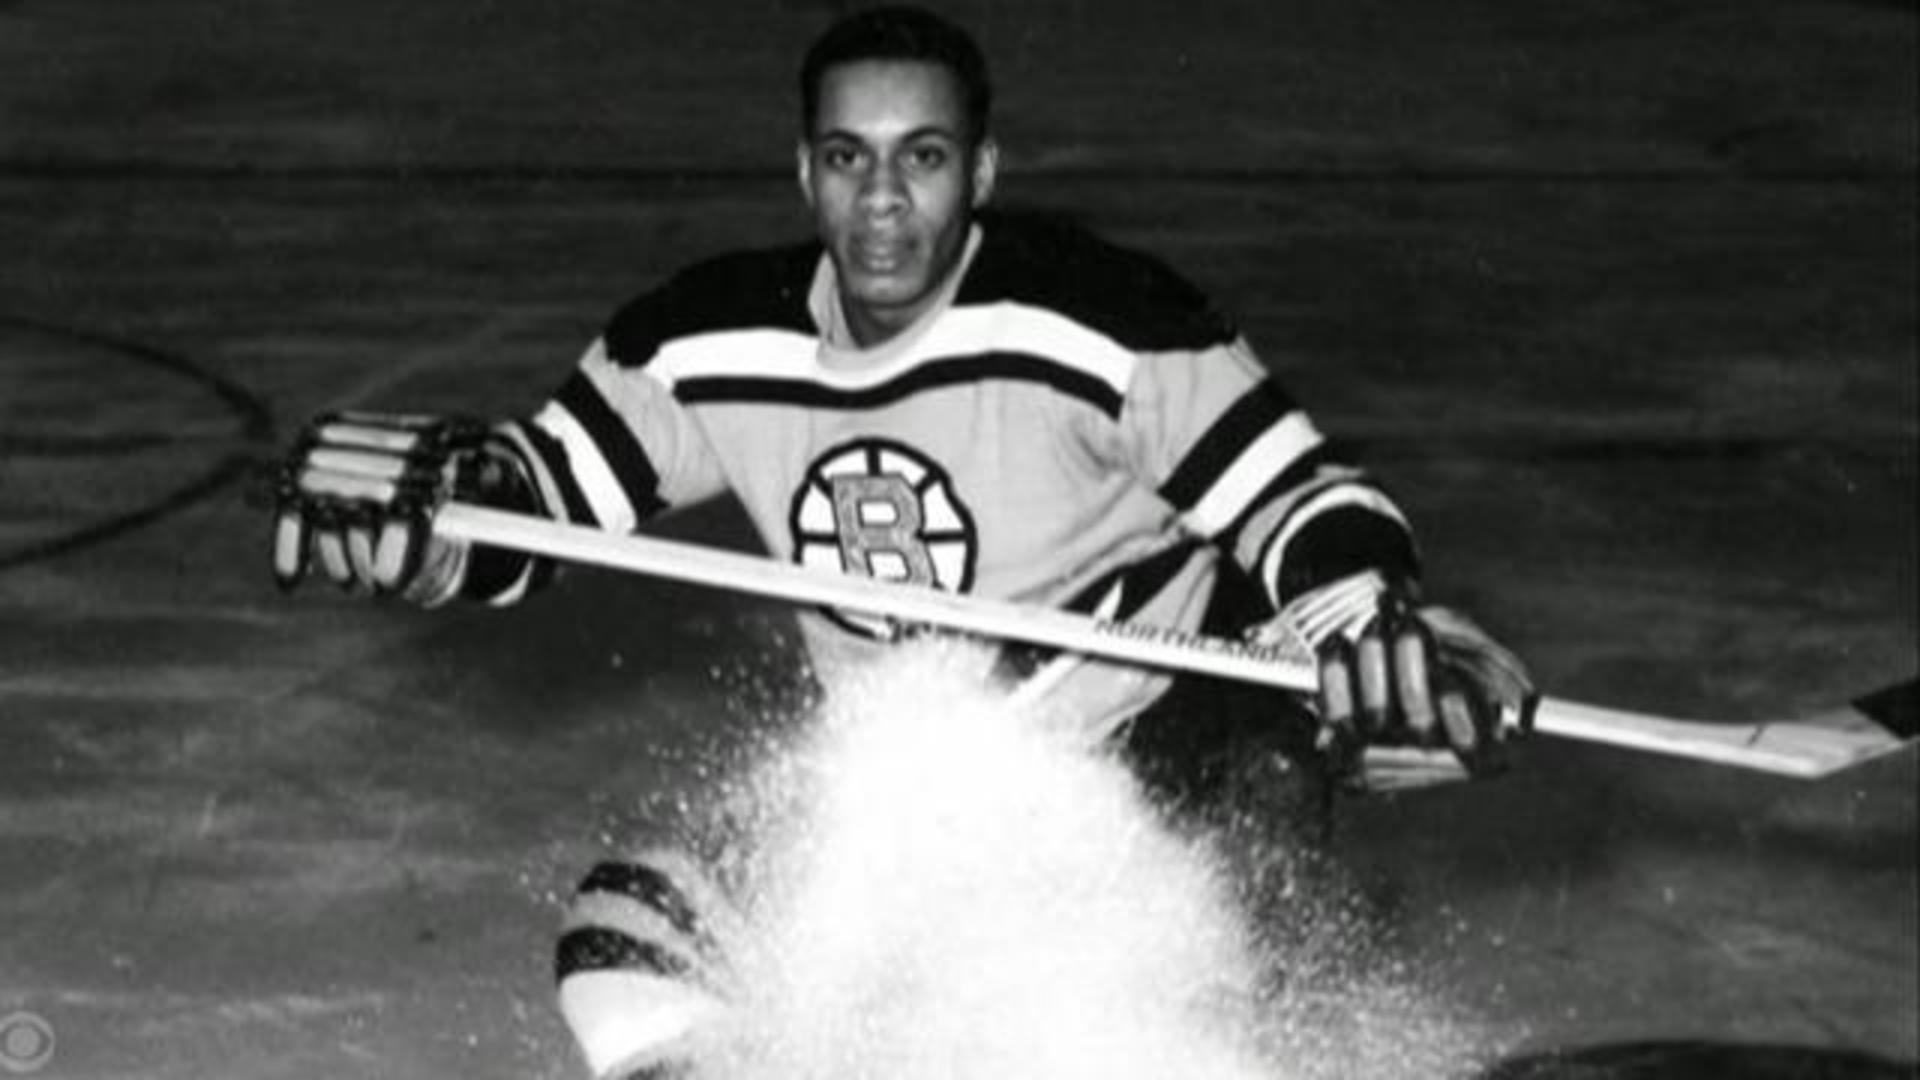 Willie O'Ree happy Bruins gave him a chance - The Boston Globe